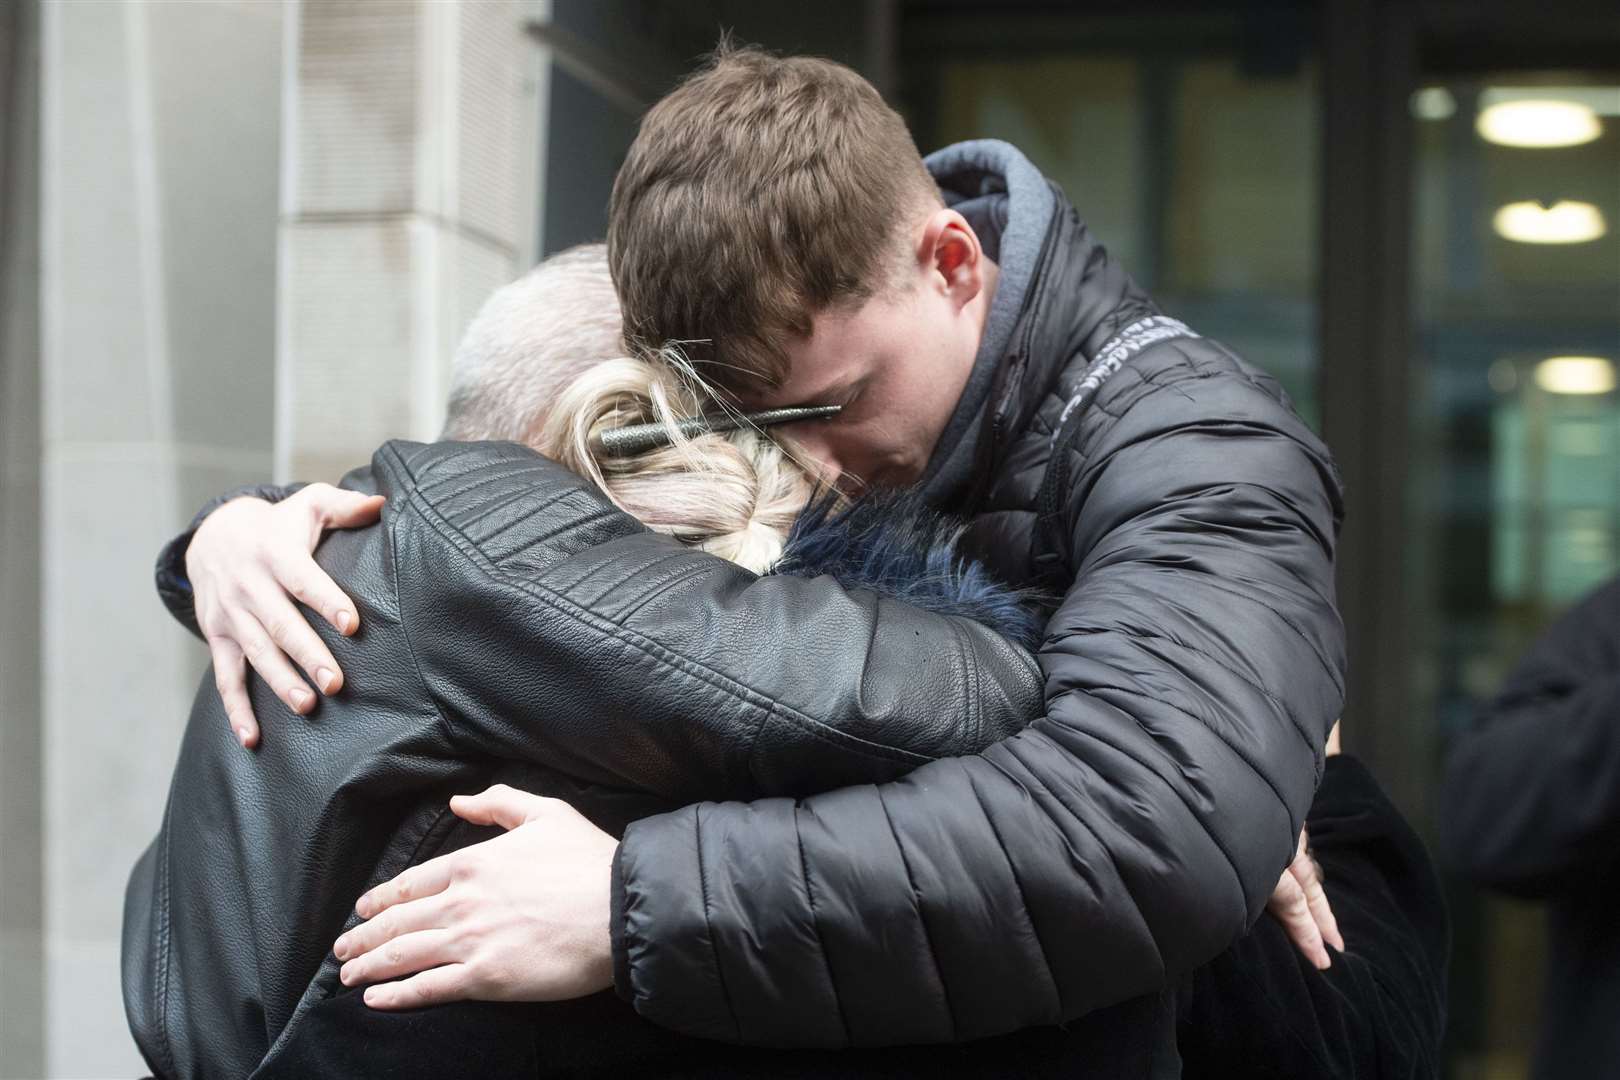 Charlotte Charles, Bruce Charles (left) and family friend Isaac Seiger hug outside the Ministry of Justice in London after meeting the director of public prosecutions. Anne Sacoolas has been charged with causing death by dangerous driving (David Mirzoeff/PA)